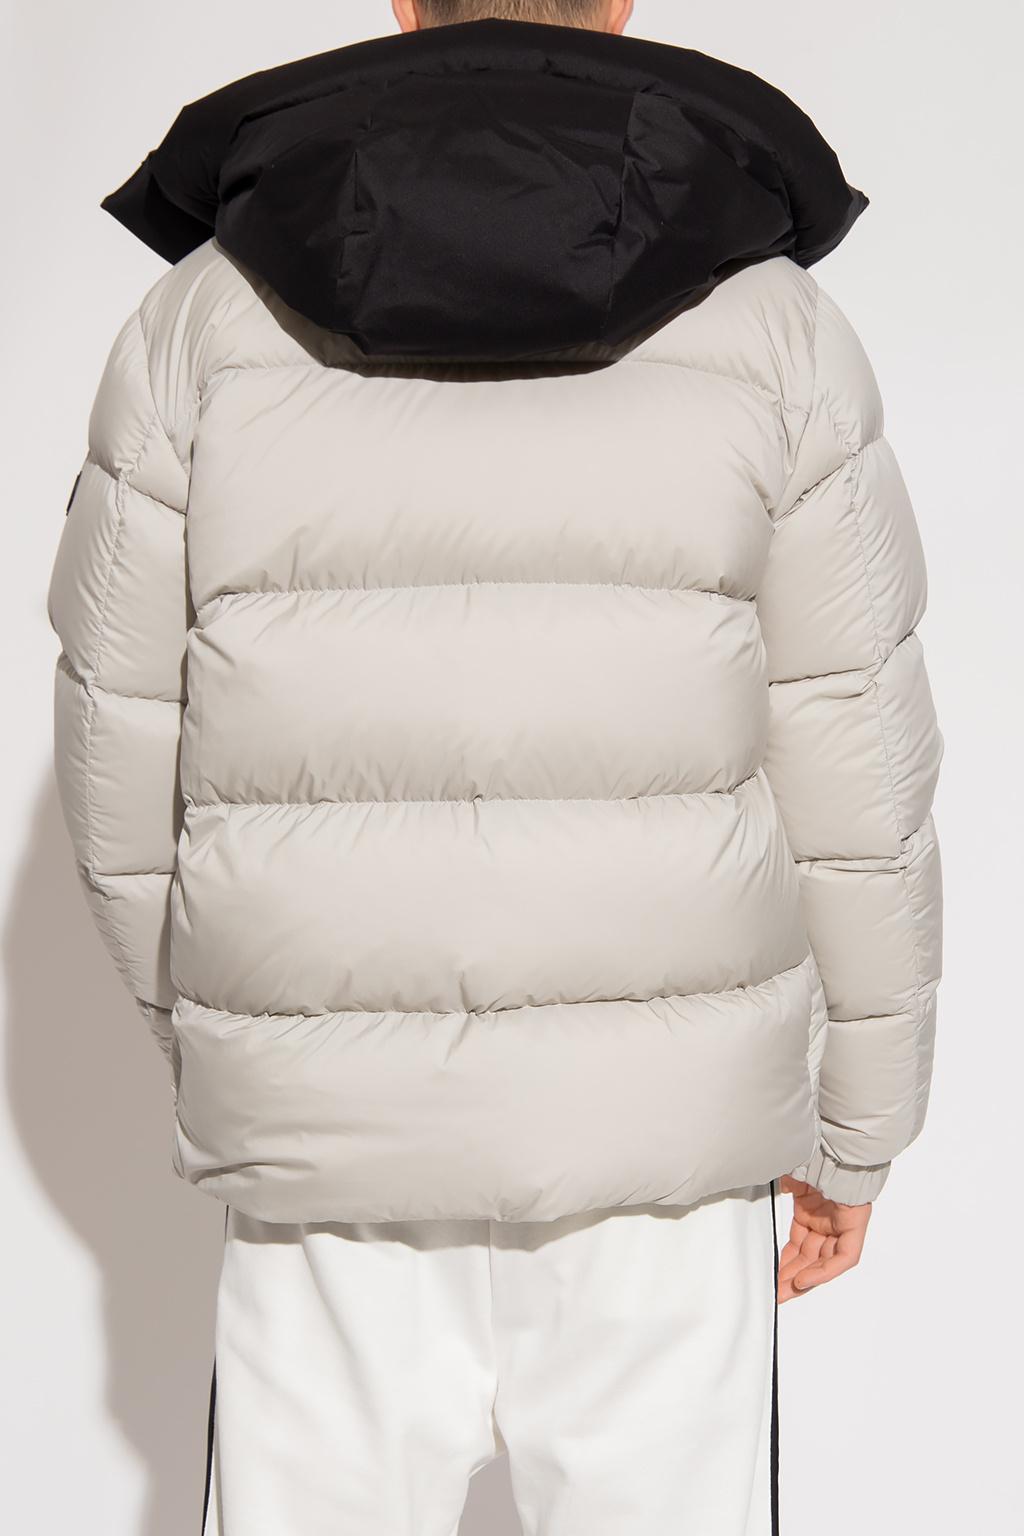 Moncler 'madeira' Down Jacket in Gray for Men | Lyst